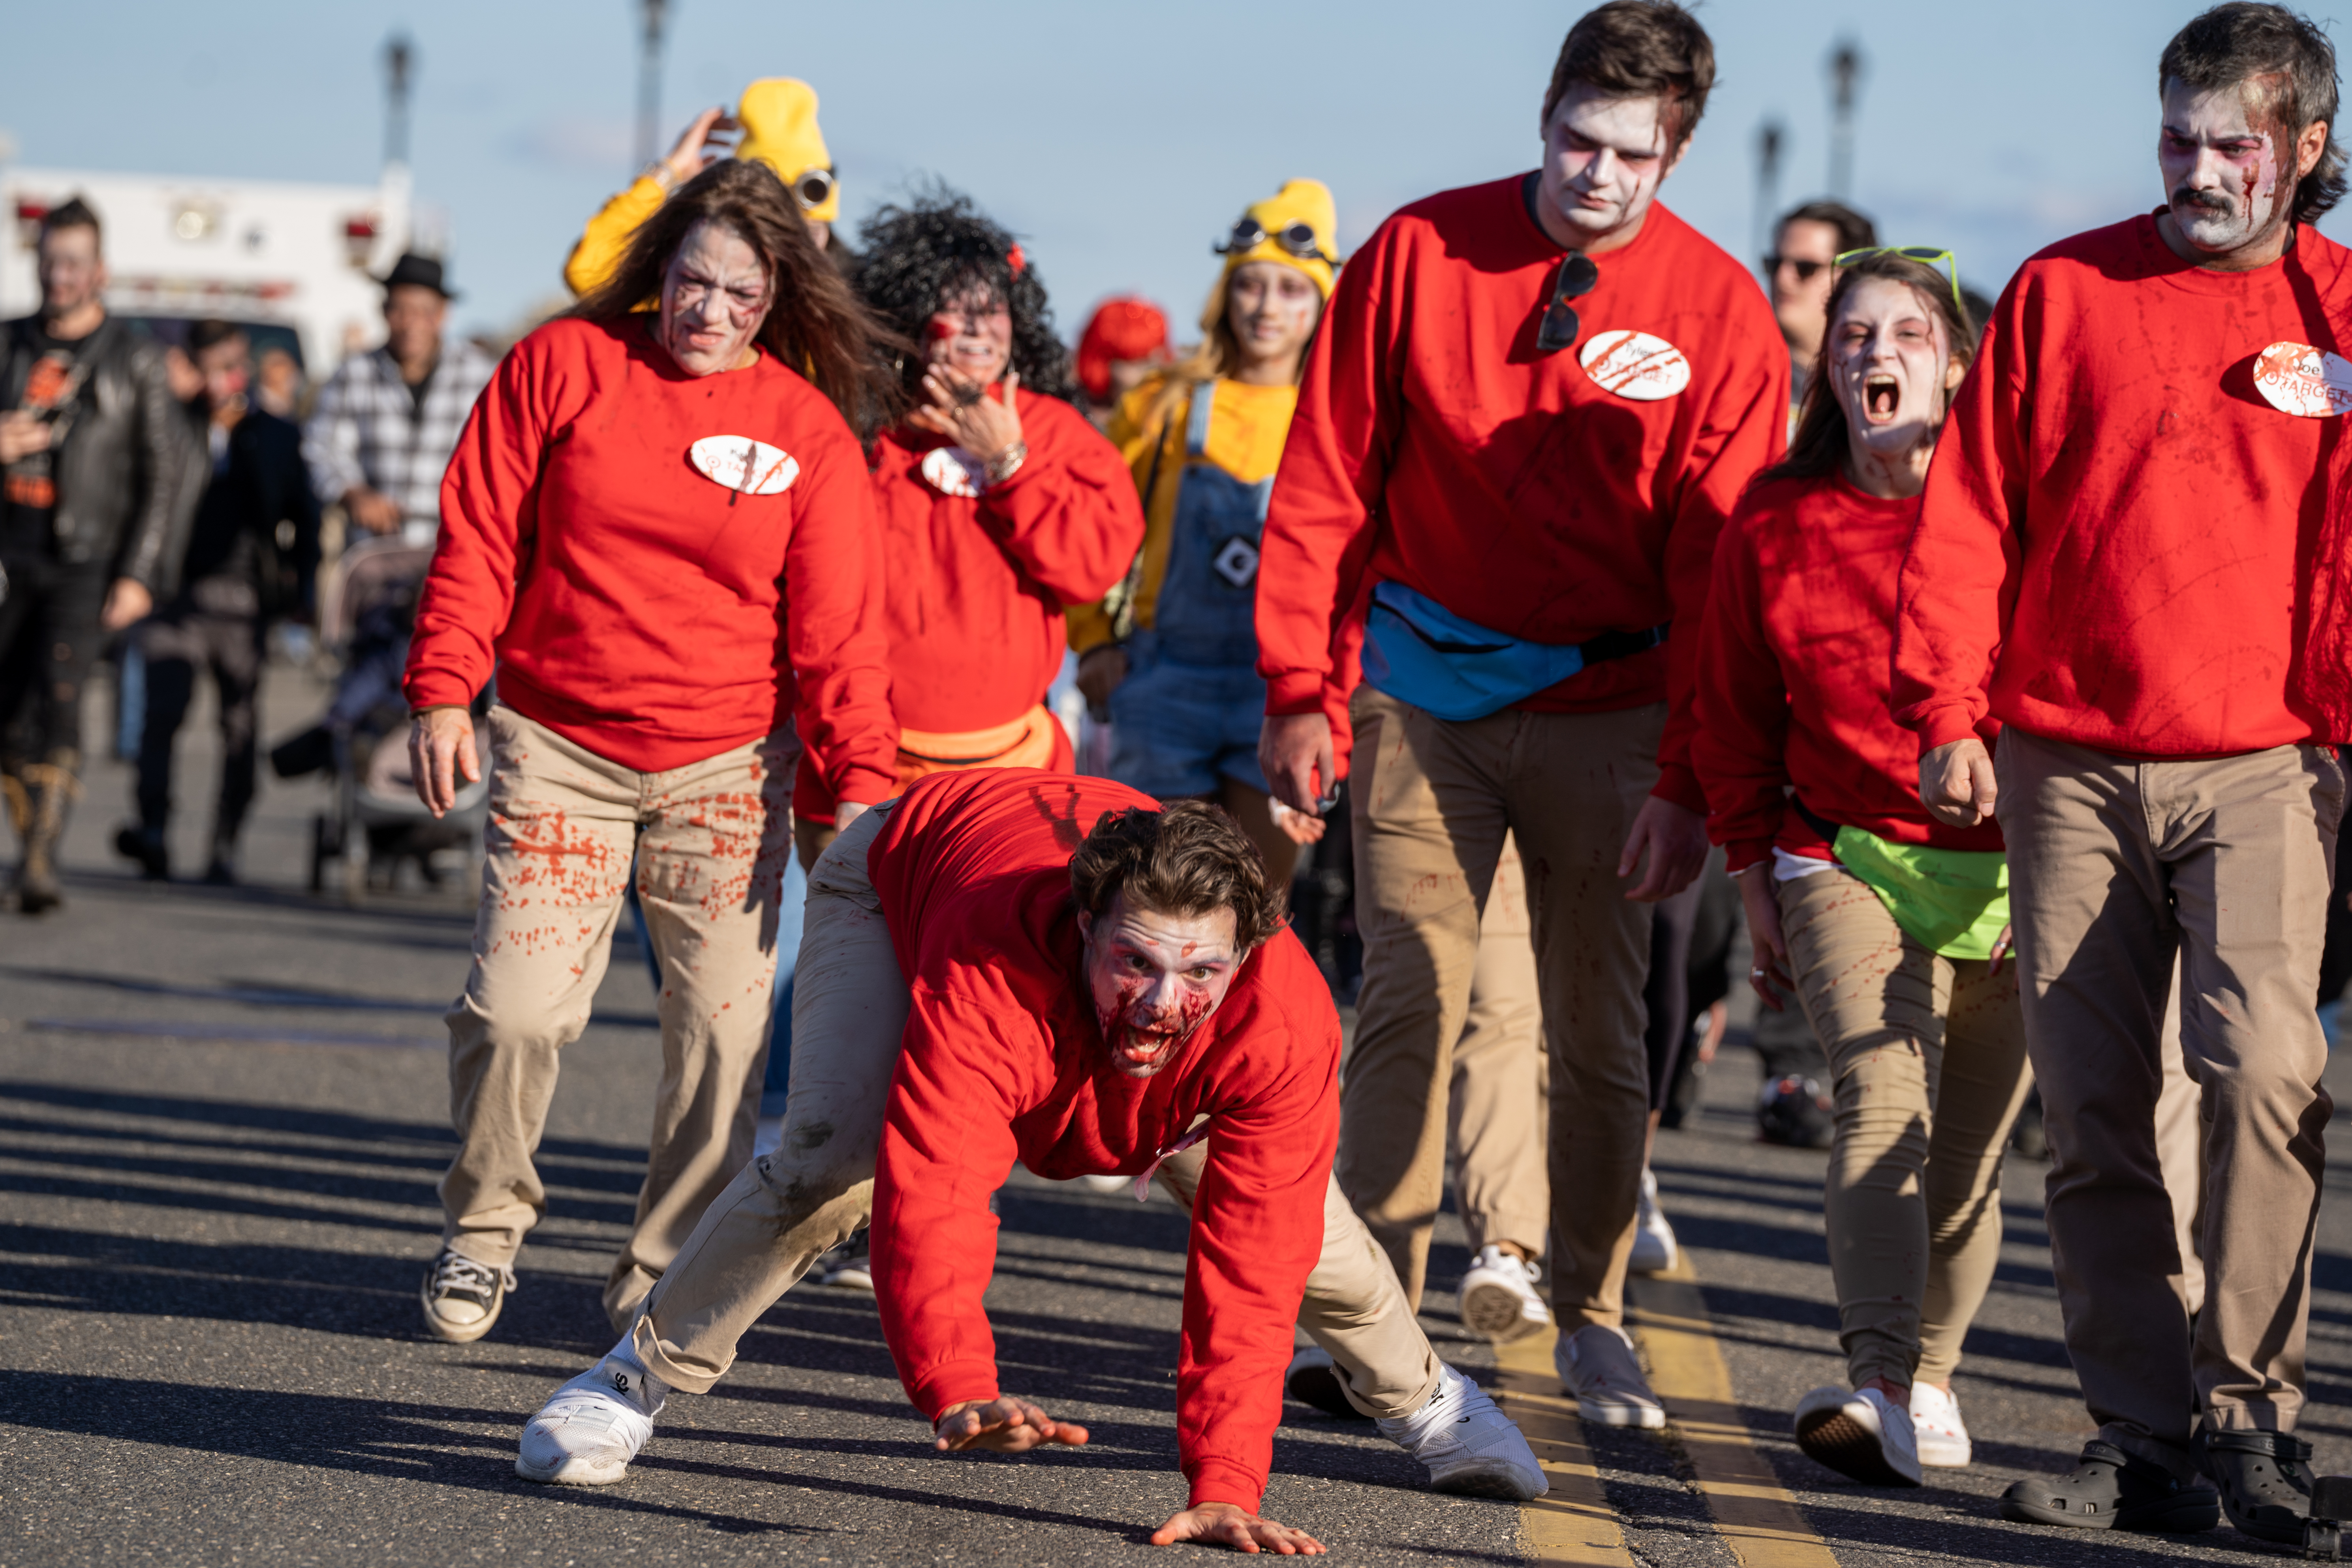 Mike Wagner, walking on all fours, leads a pack of zombie Target employees down the street during the 14th Asbury Park Zombie Walk in Asbury Park on Saturday, October 8, 2022. The zombie walk held its first themed year with the theme being 80's and 90's punk and metal.